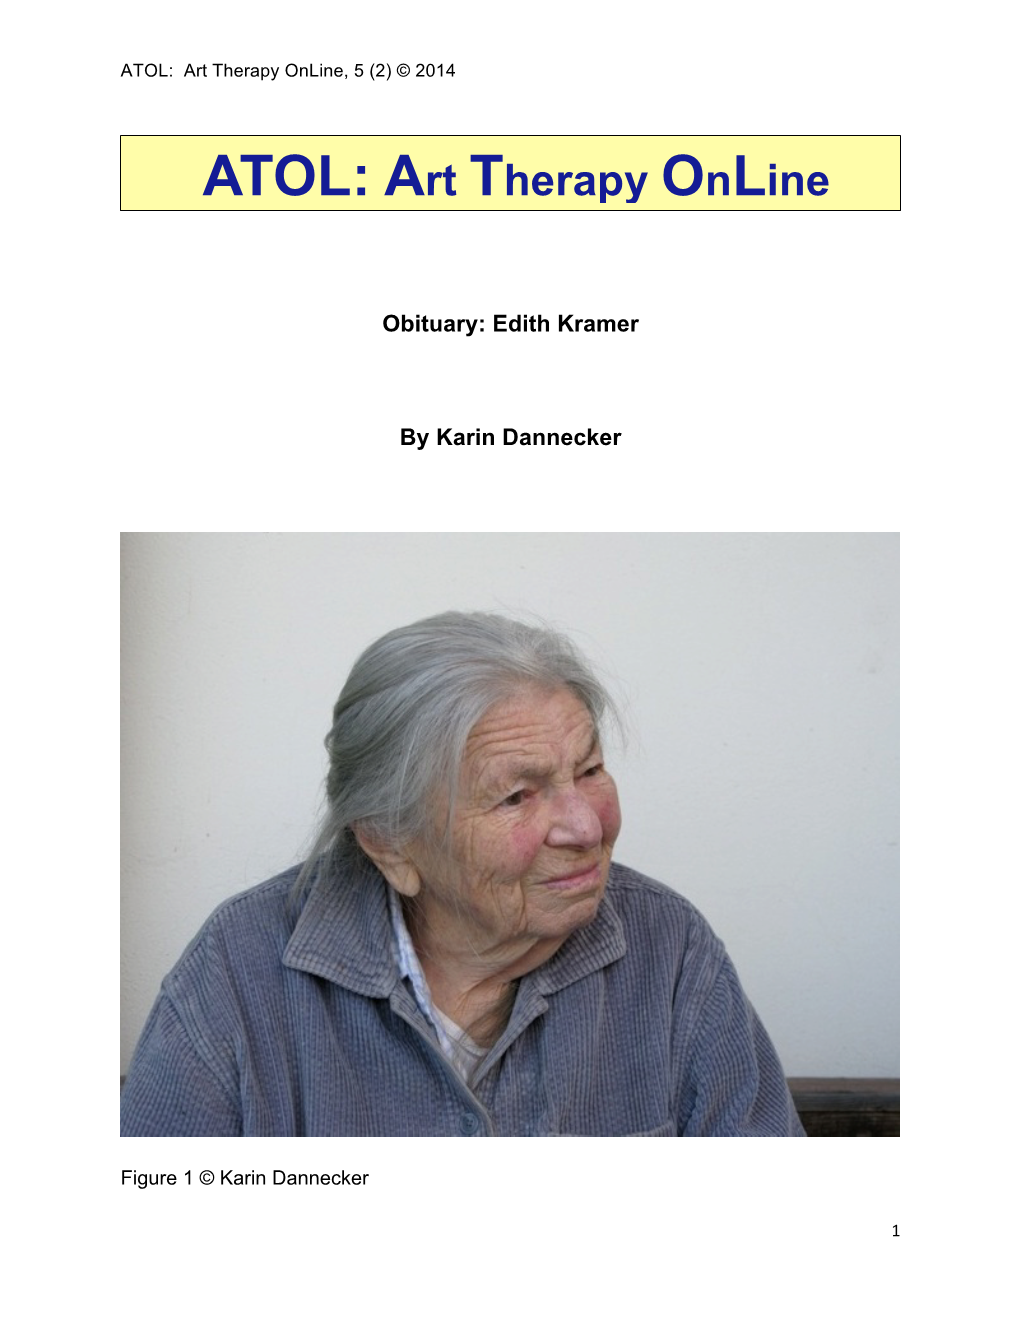 ATOL: Art Therapy Online, 5 (2) © 2014